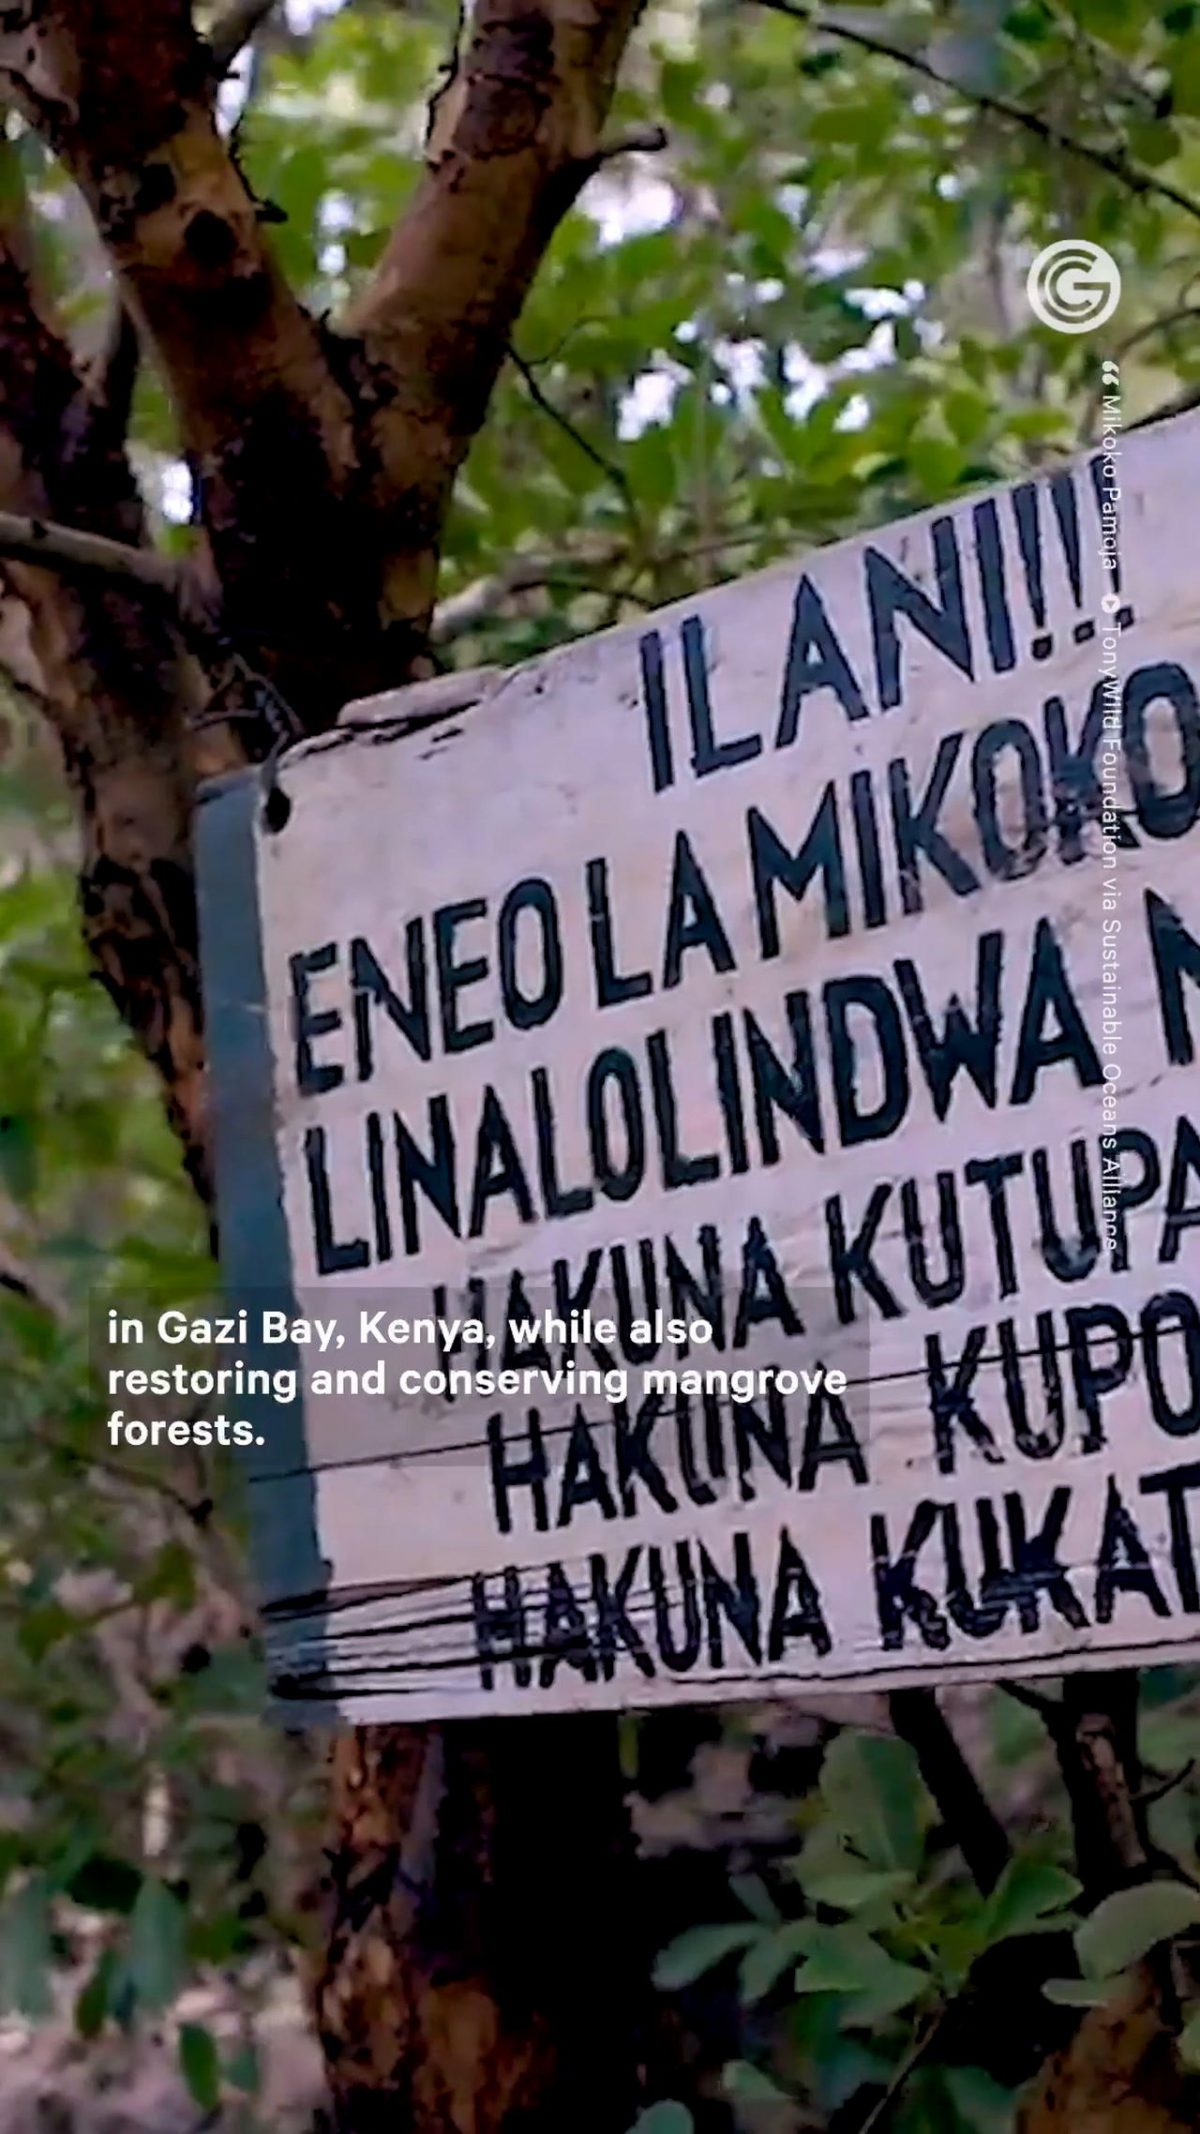 How One Community Restores an Acre of Mangrove [Video]